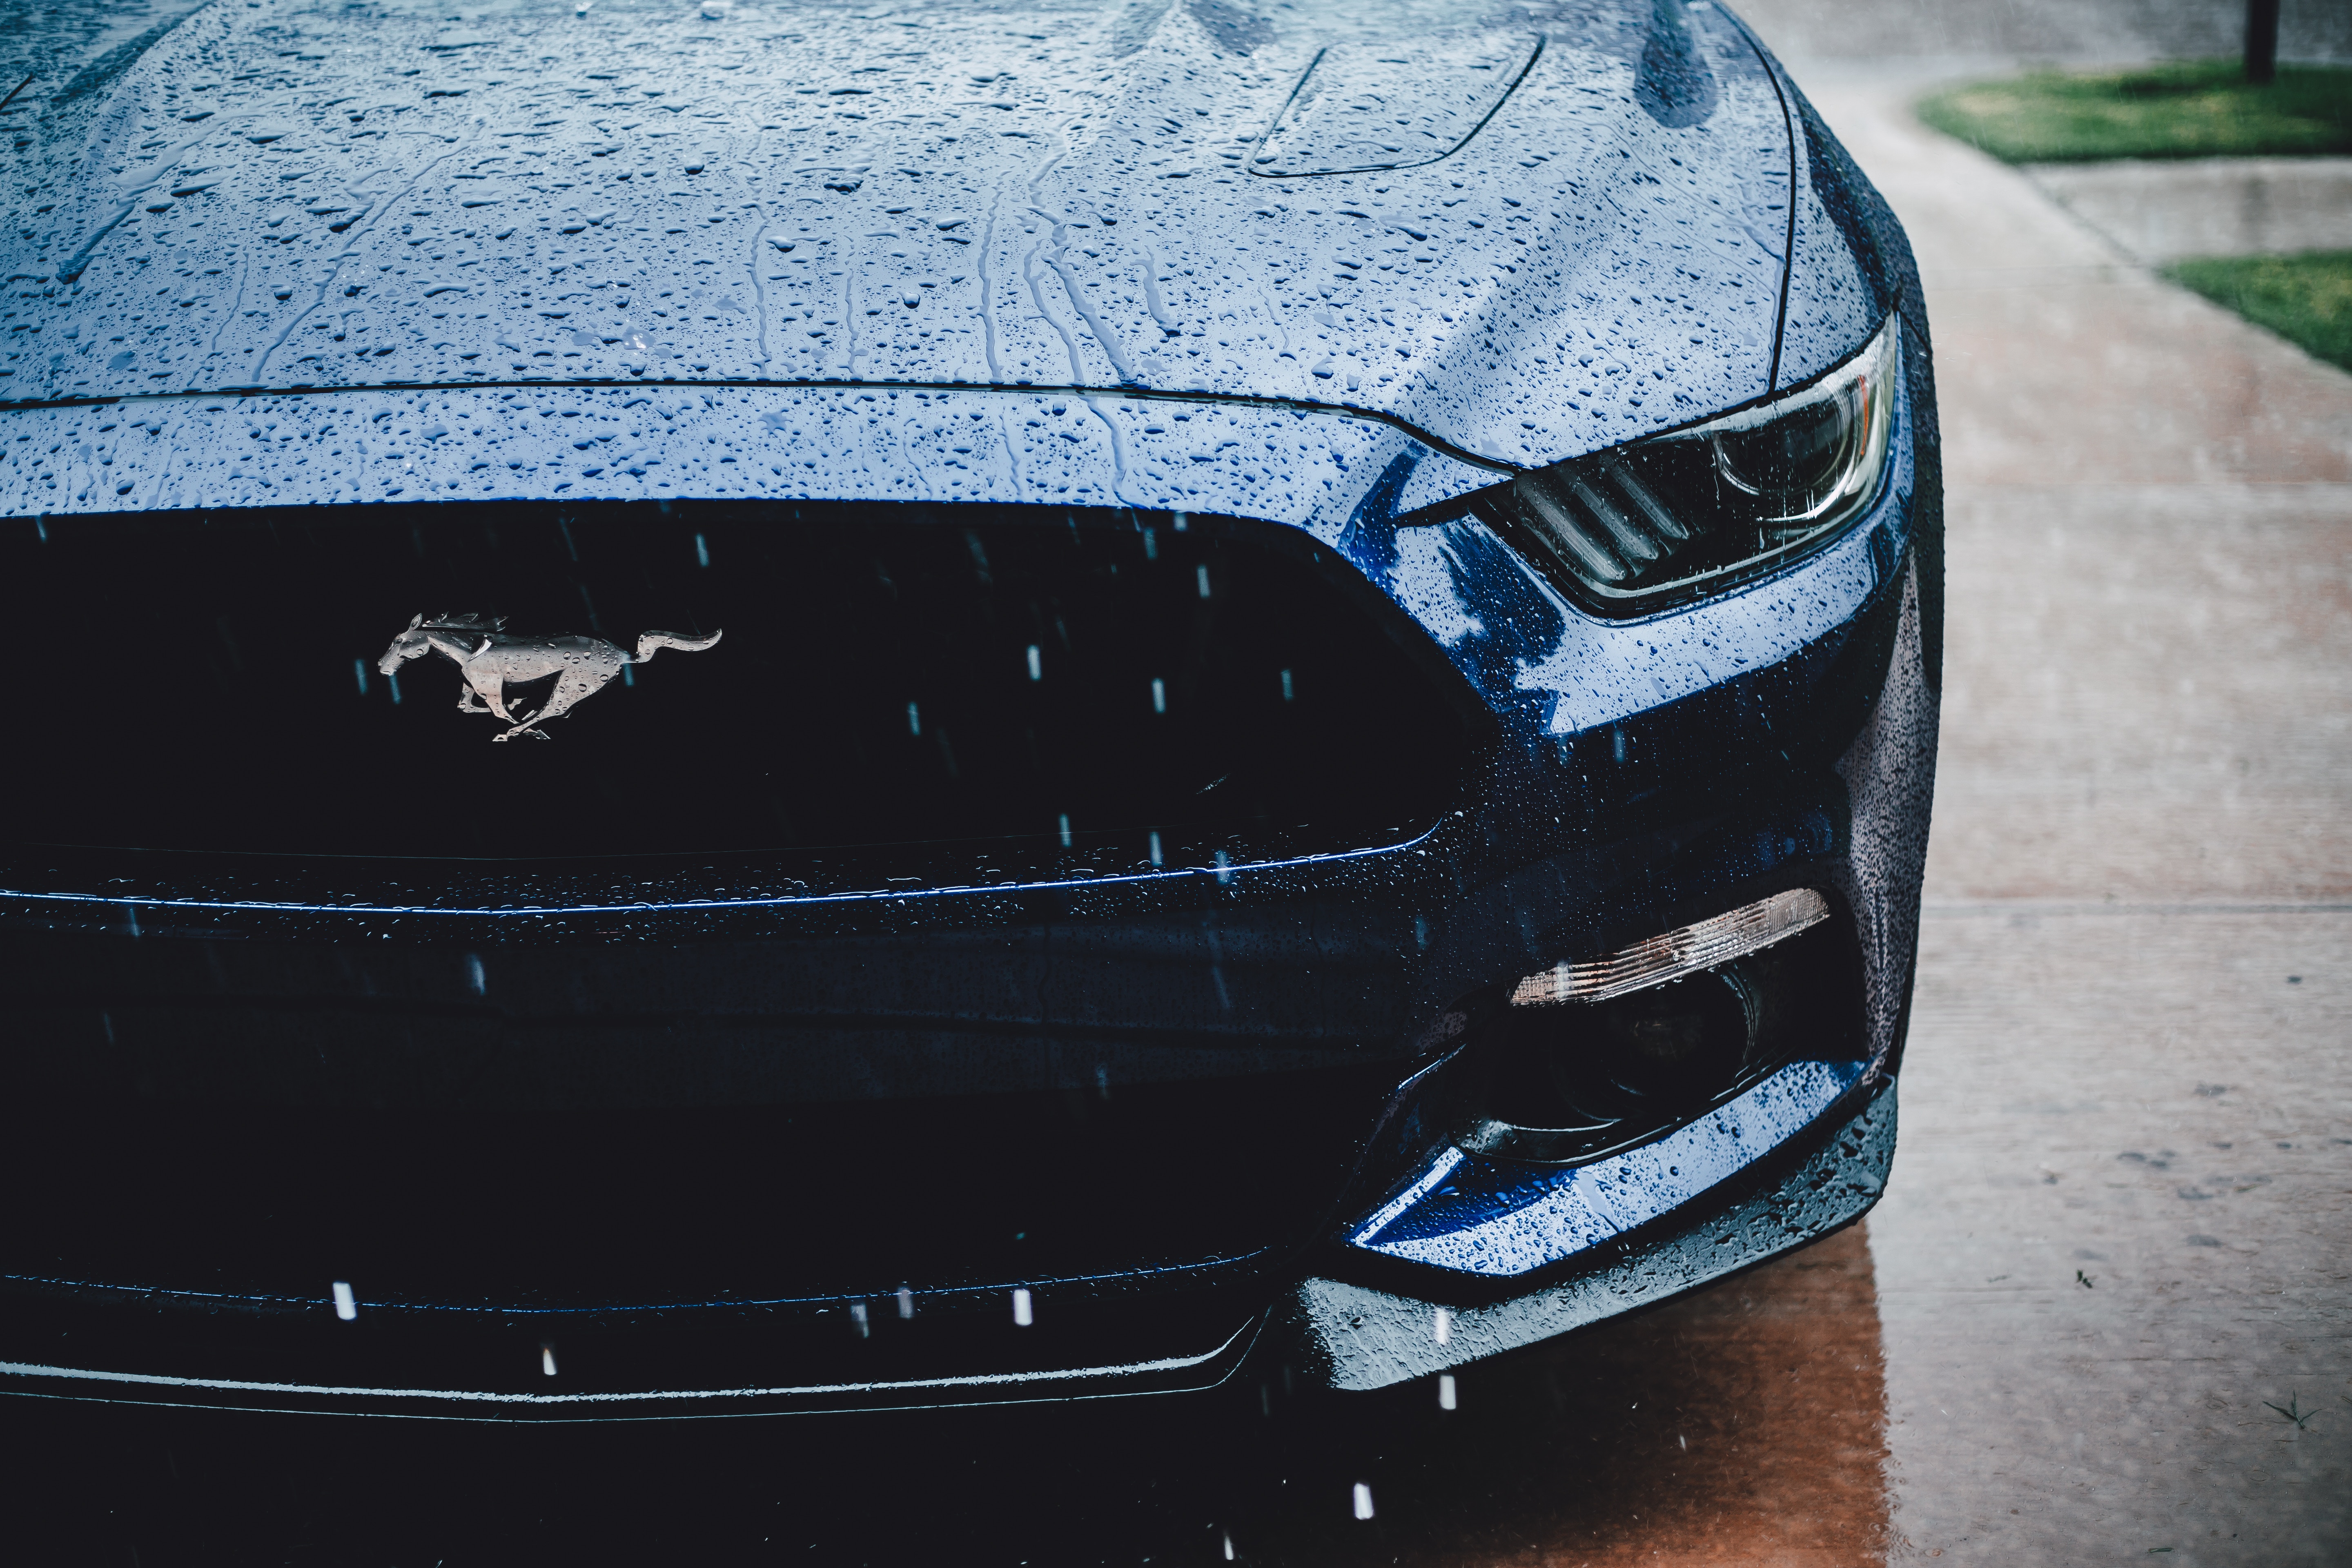 PC Wallpapers ford mustang, cars, rain, front view, headlight